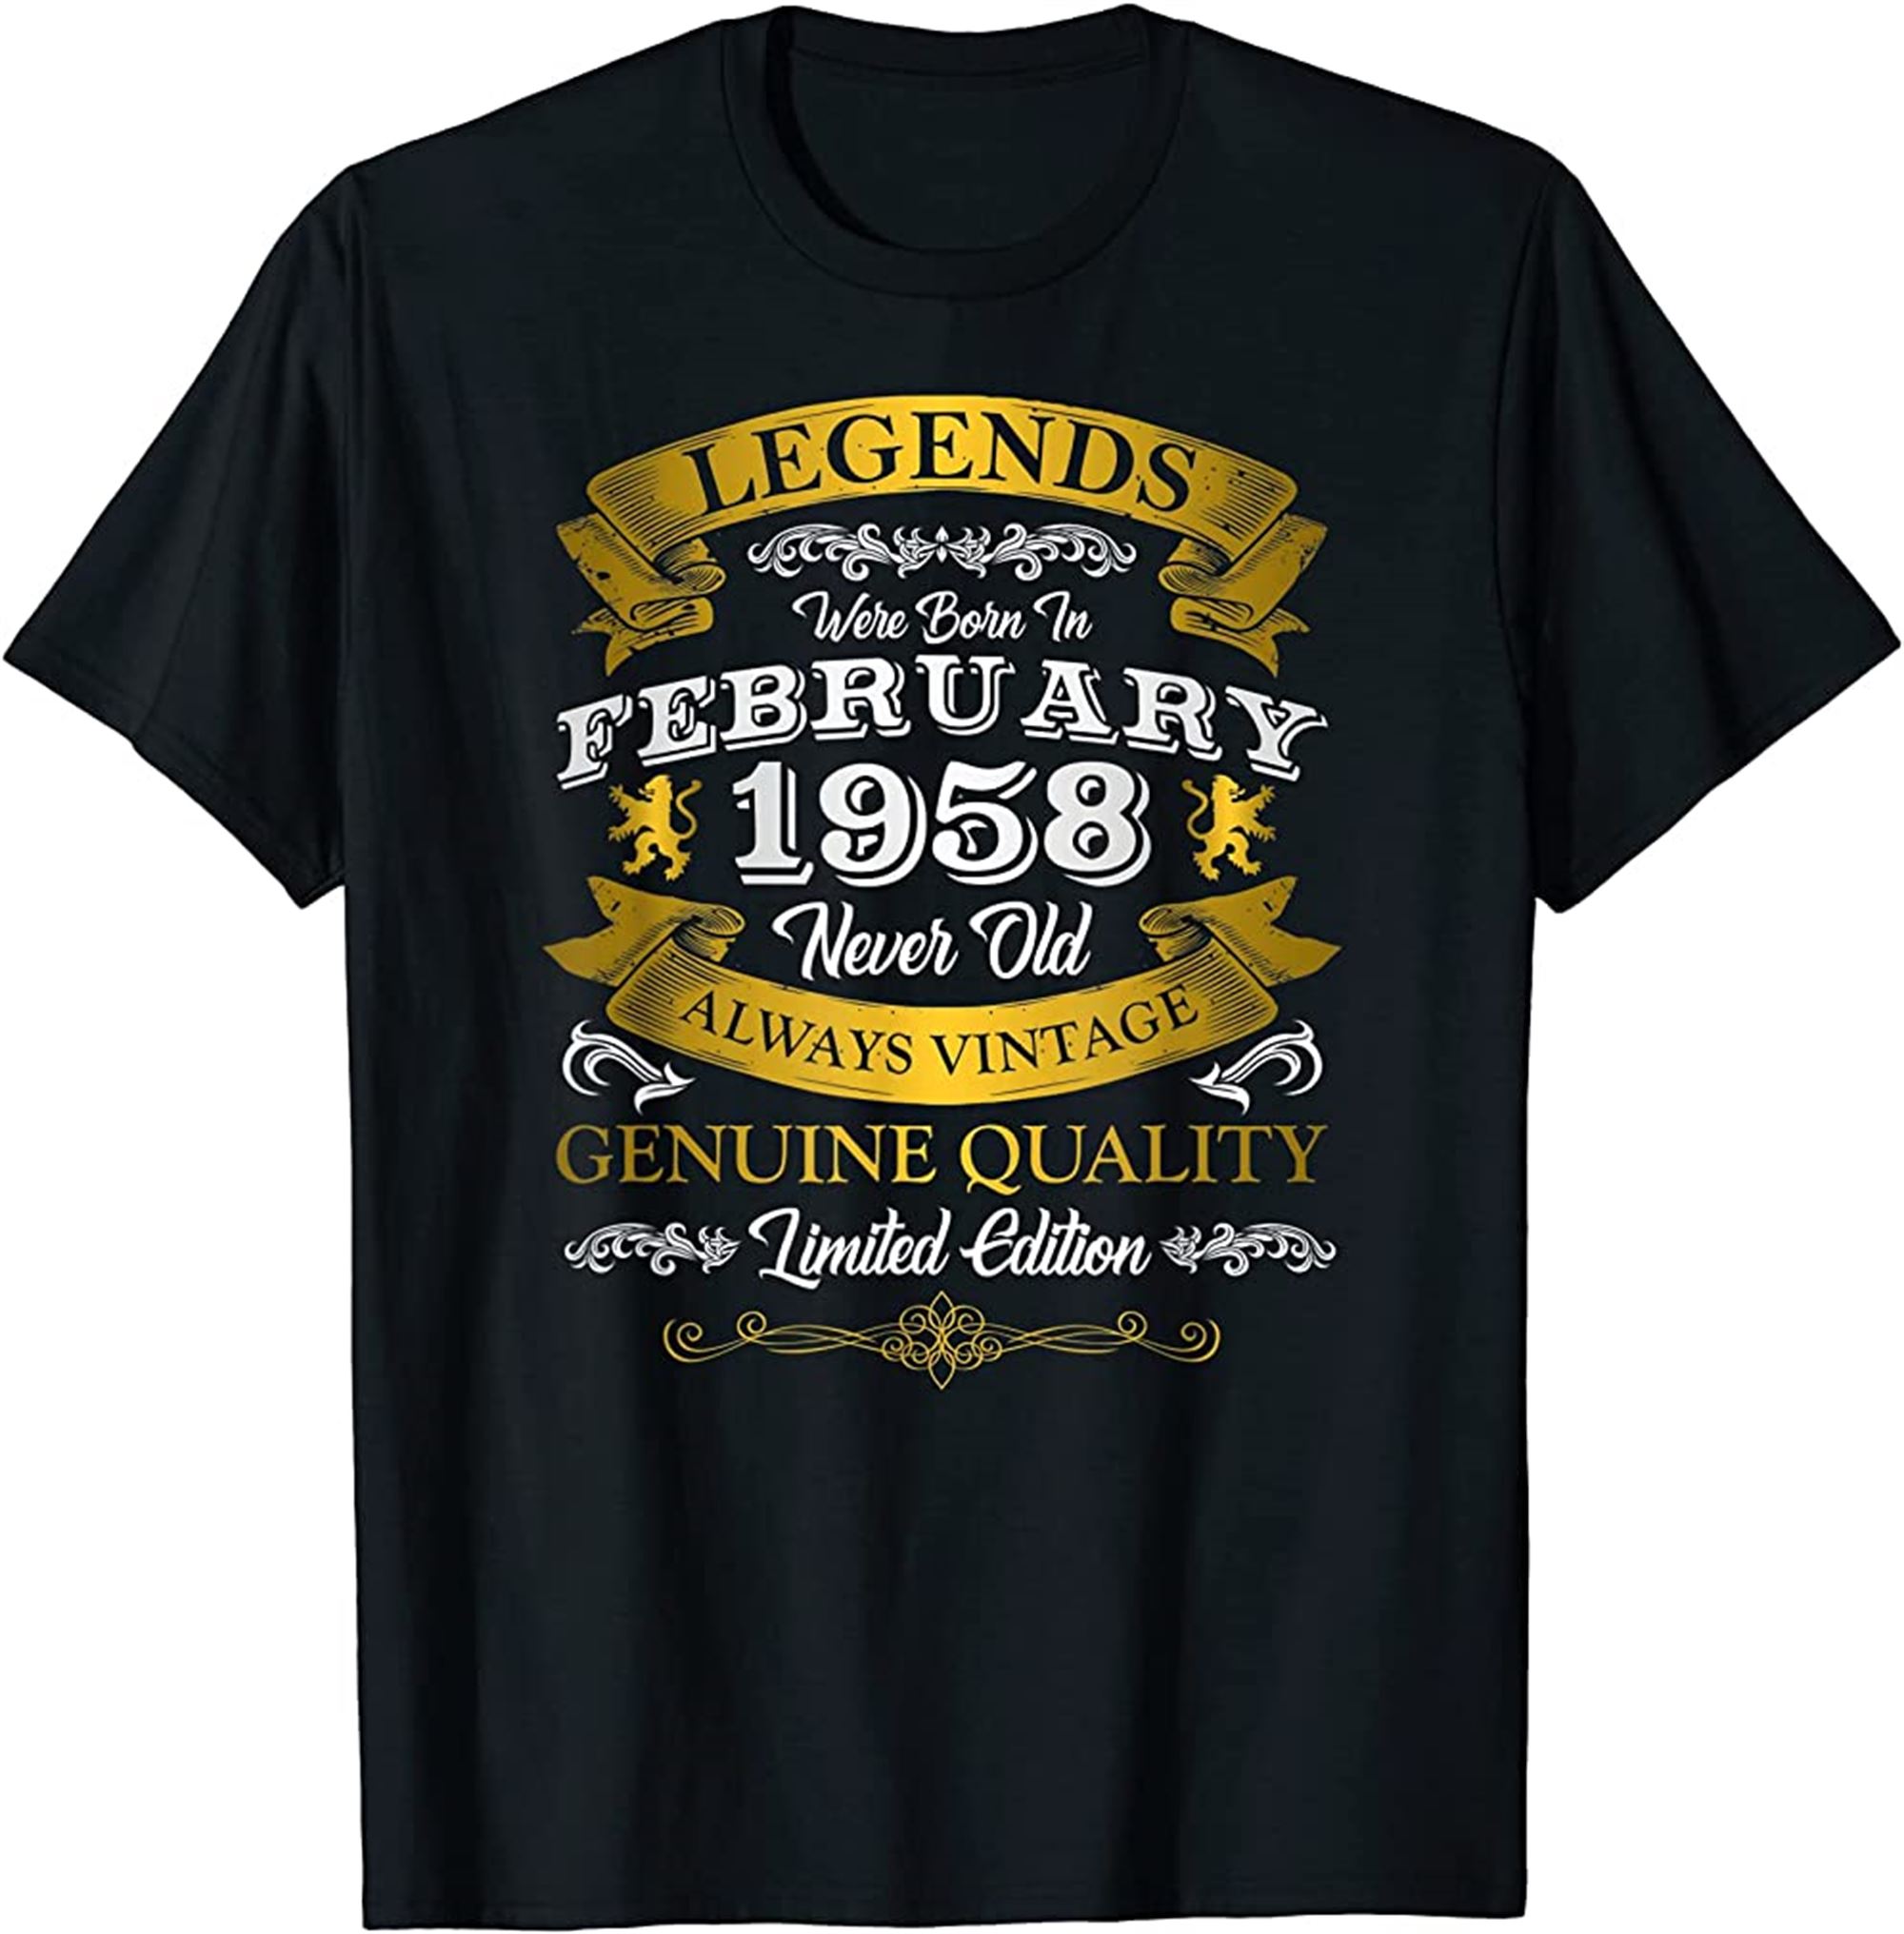 Birthday Legends Were Born In February 1958 64 Anniversary T-shirt Full Size Up To 5xl